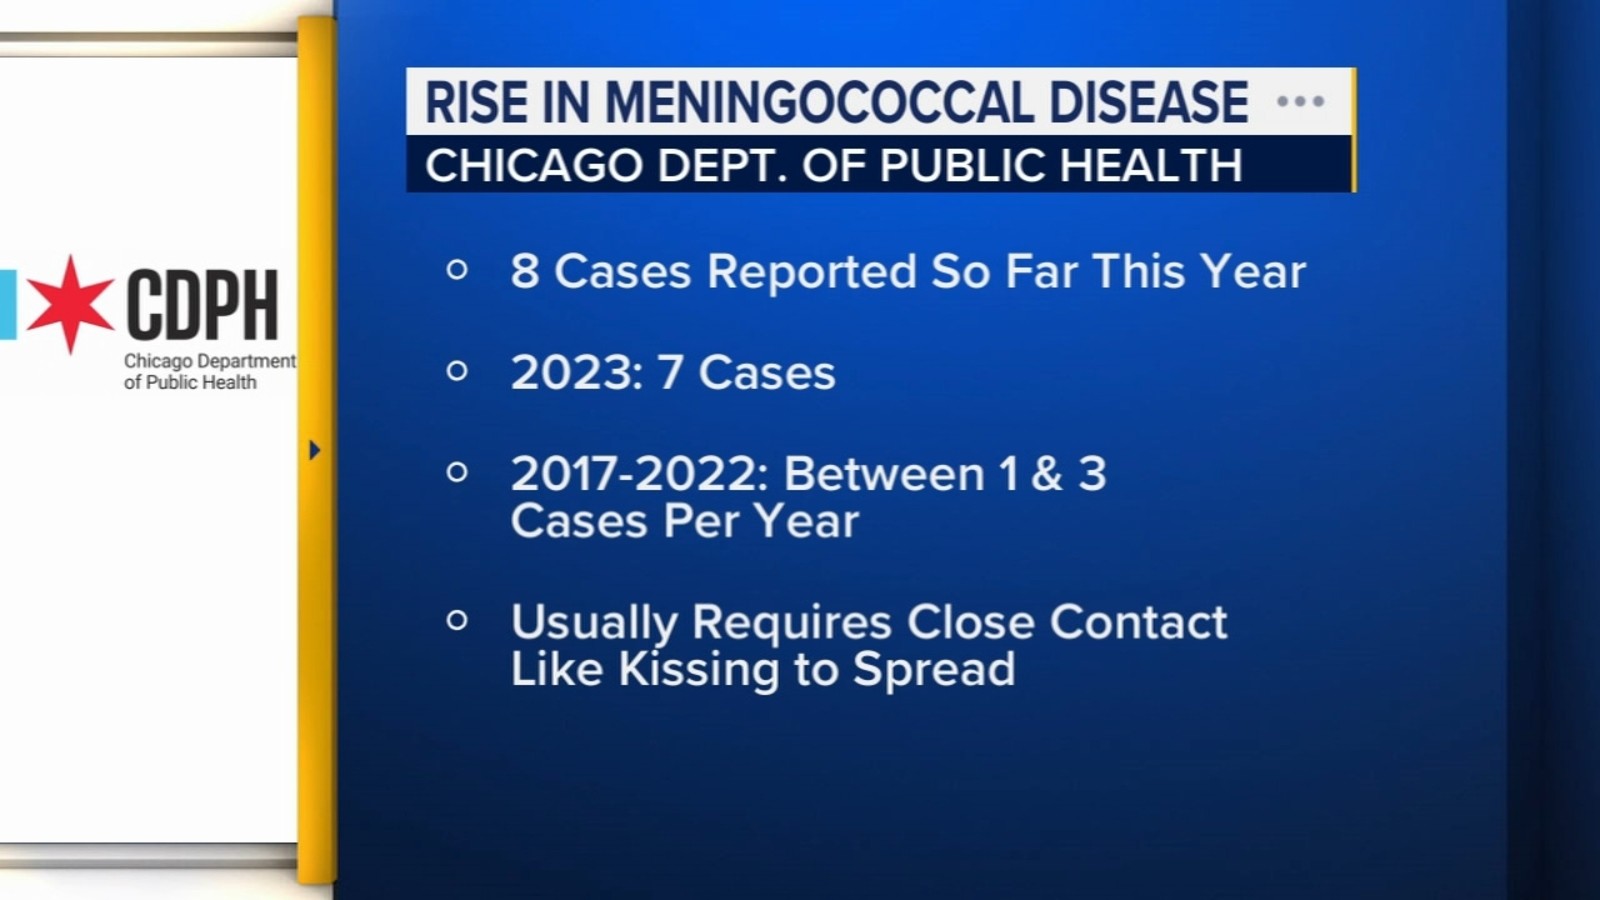 Chicago health officials monitoring uptick in meningococcal disease cases